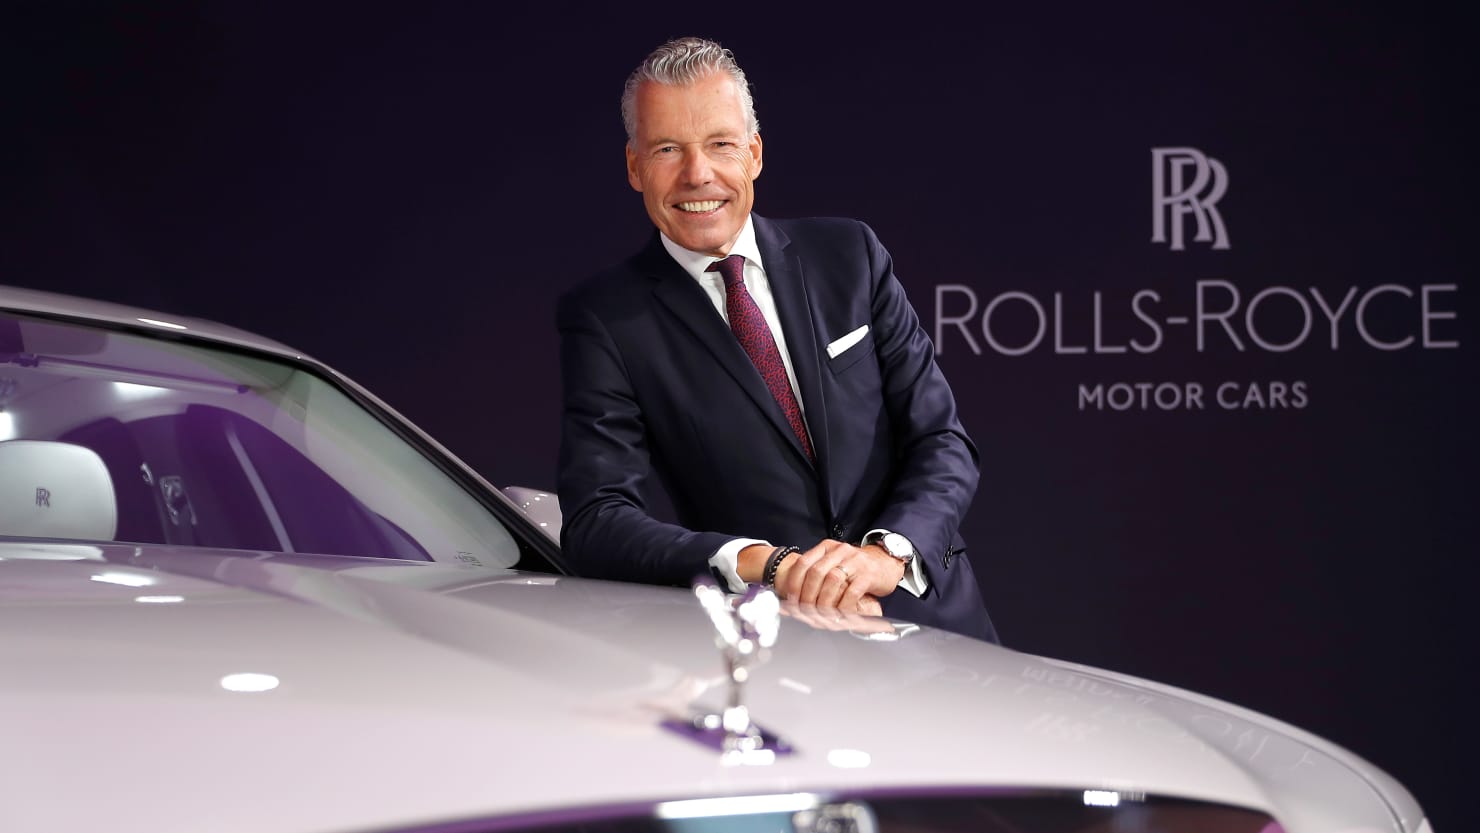 Rolls-Royce CEO Claims COVID Deaths 'Quite Massively' Helped Sales